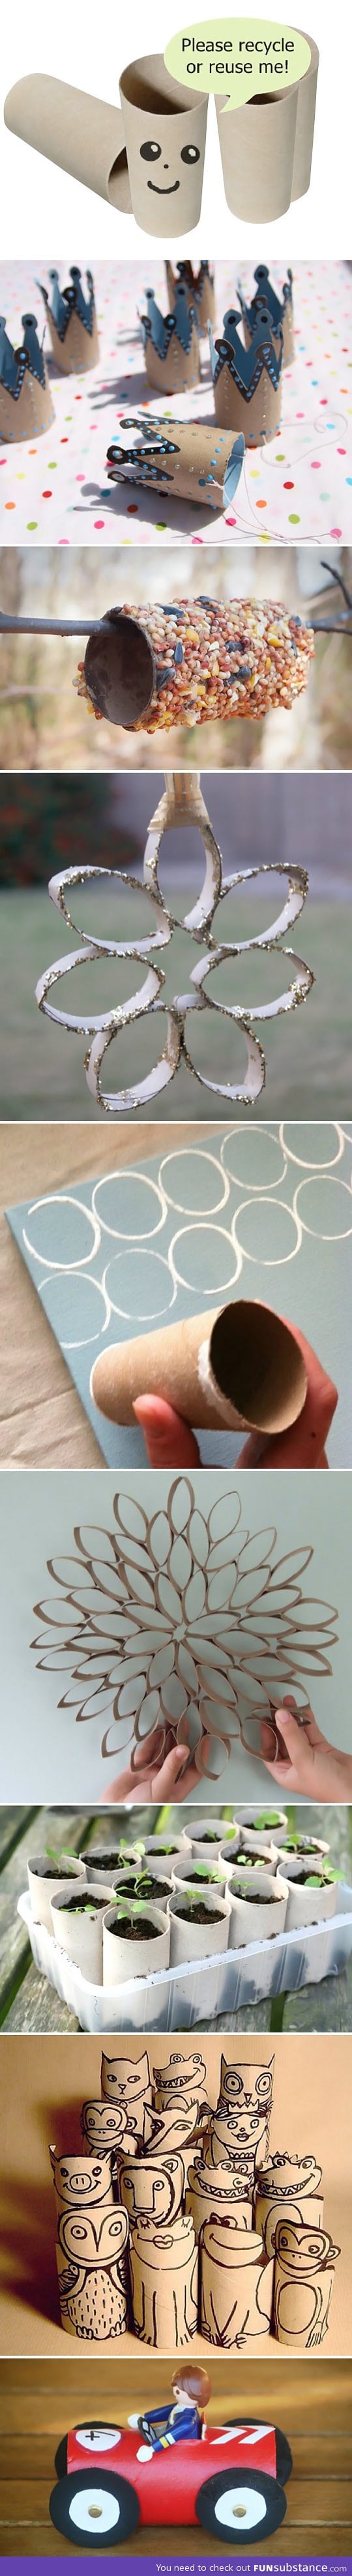 Things you can do with a toilet paper roll